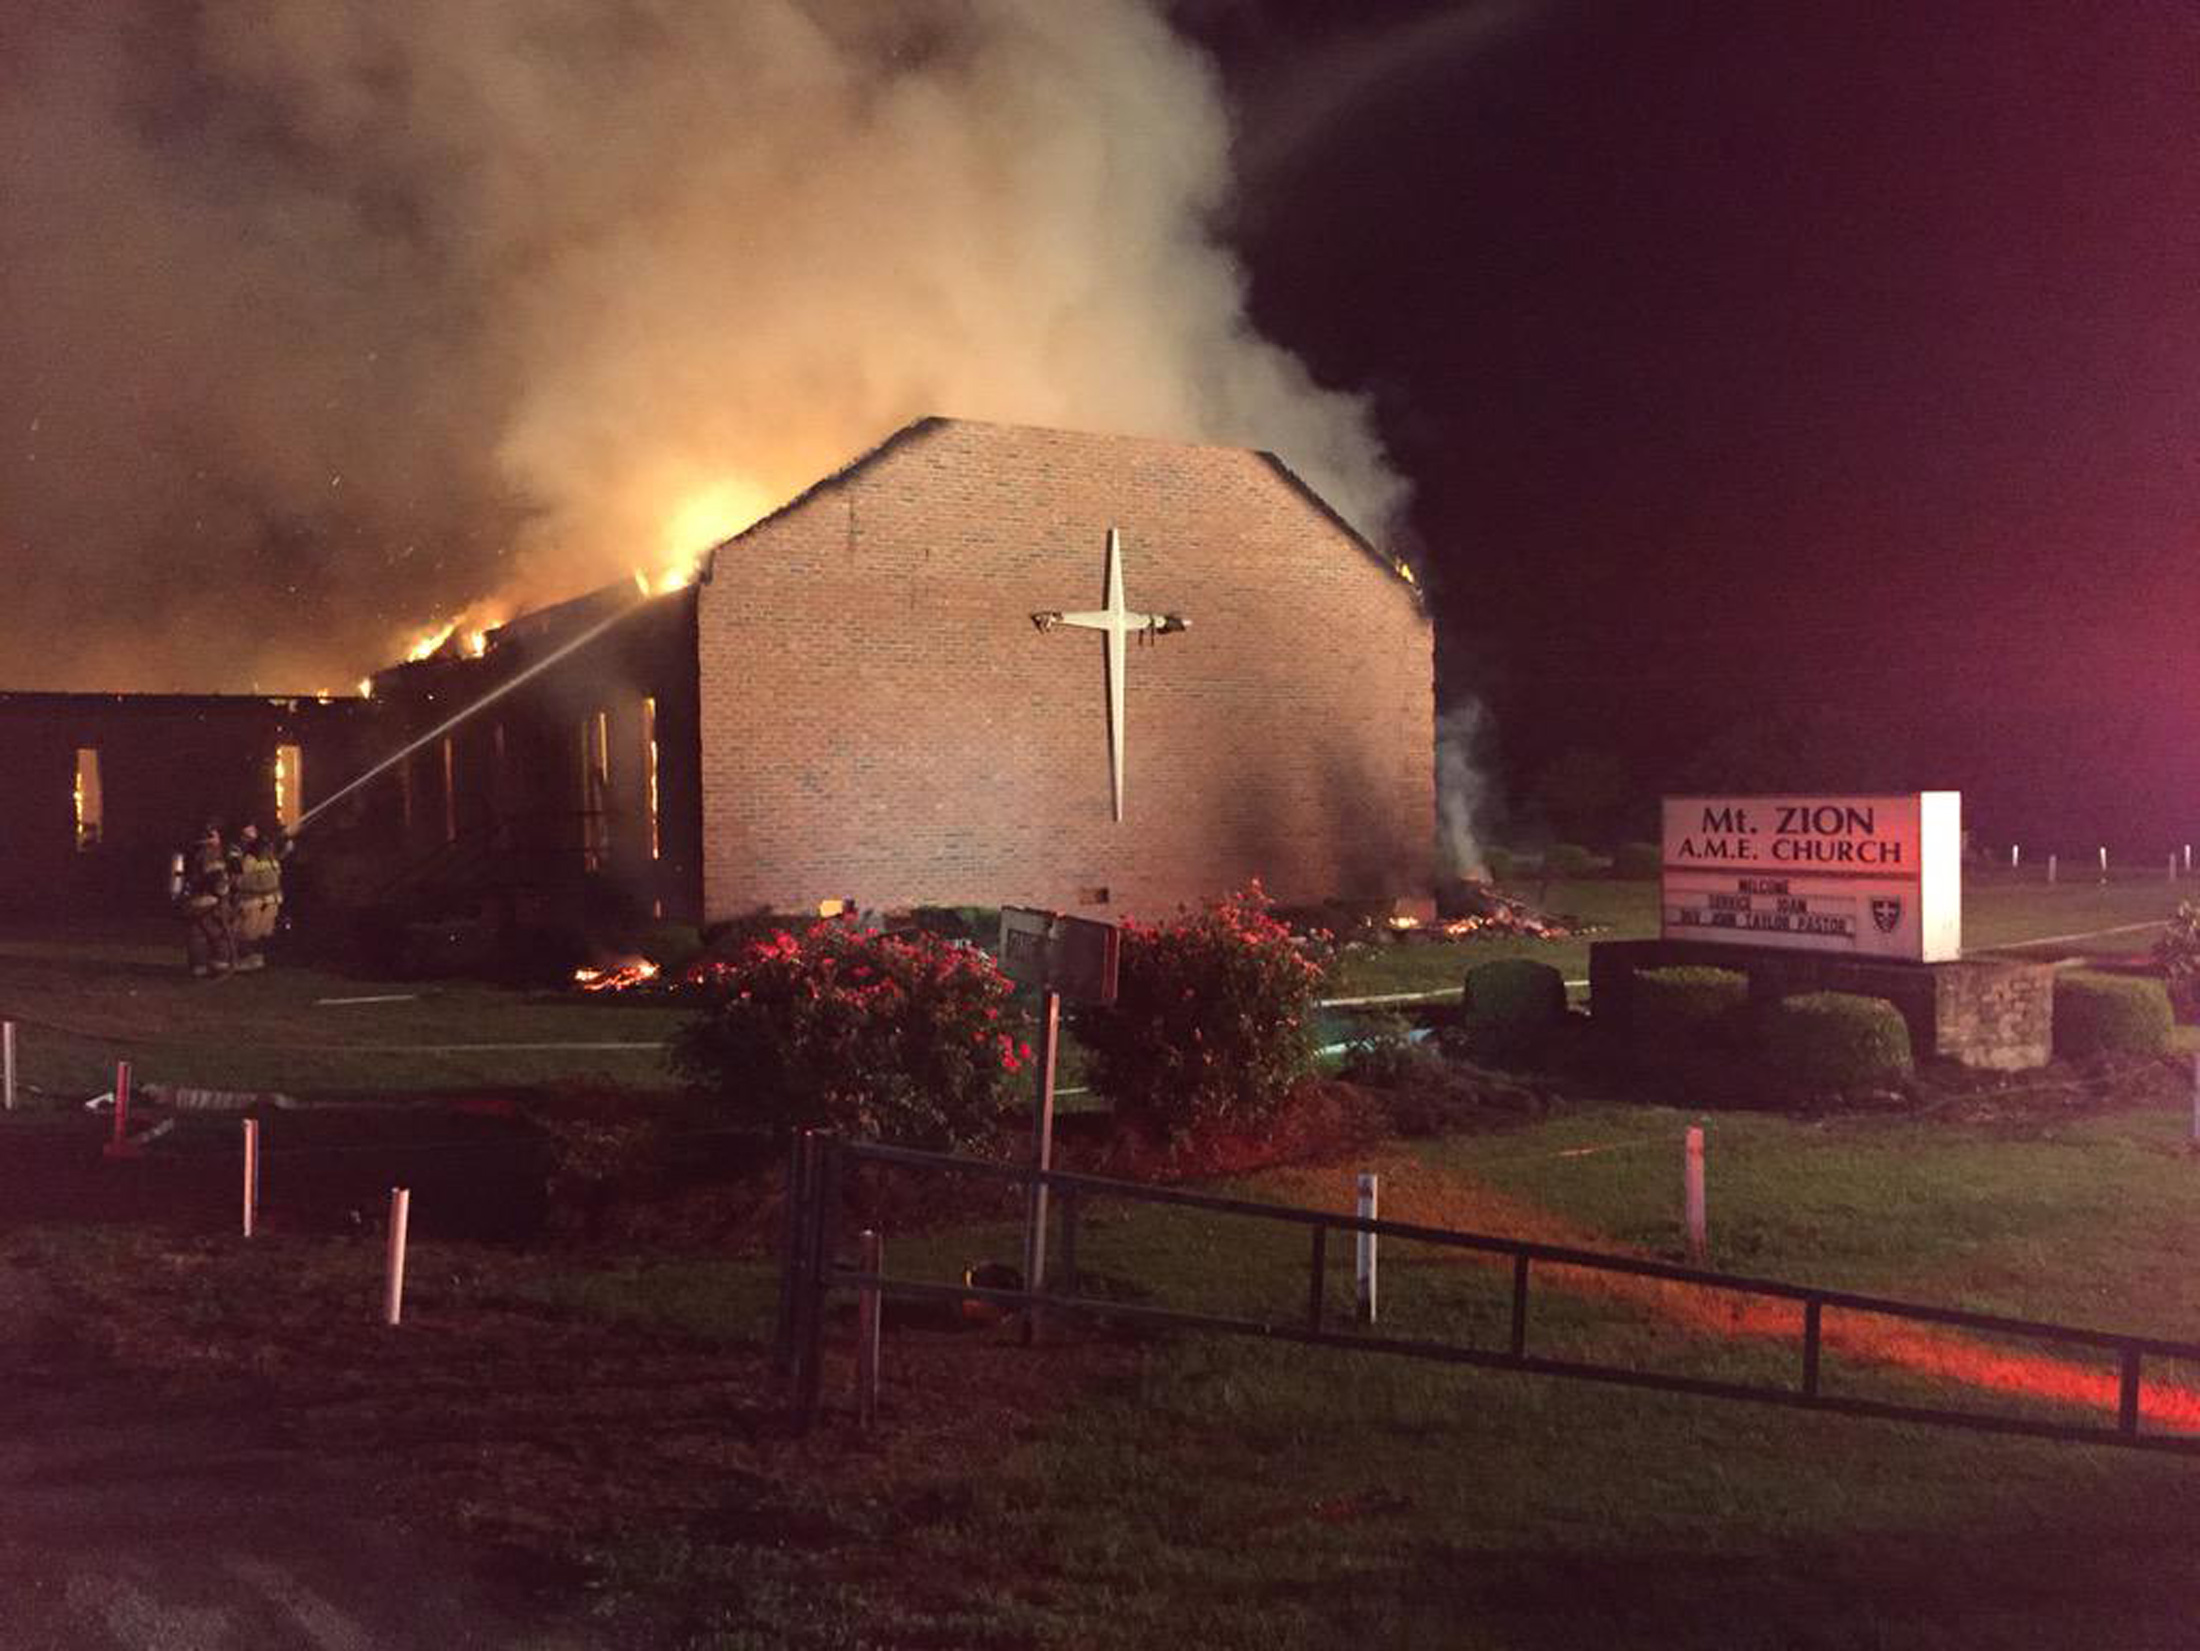 Fire crews try to control a blaze at the Mt. Zion African Methodist Episcopal Church in Greeleyville, S.C., on the night of June 30, 2015 (Clarendon County Fire Department/Reuters)